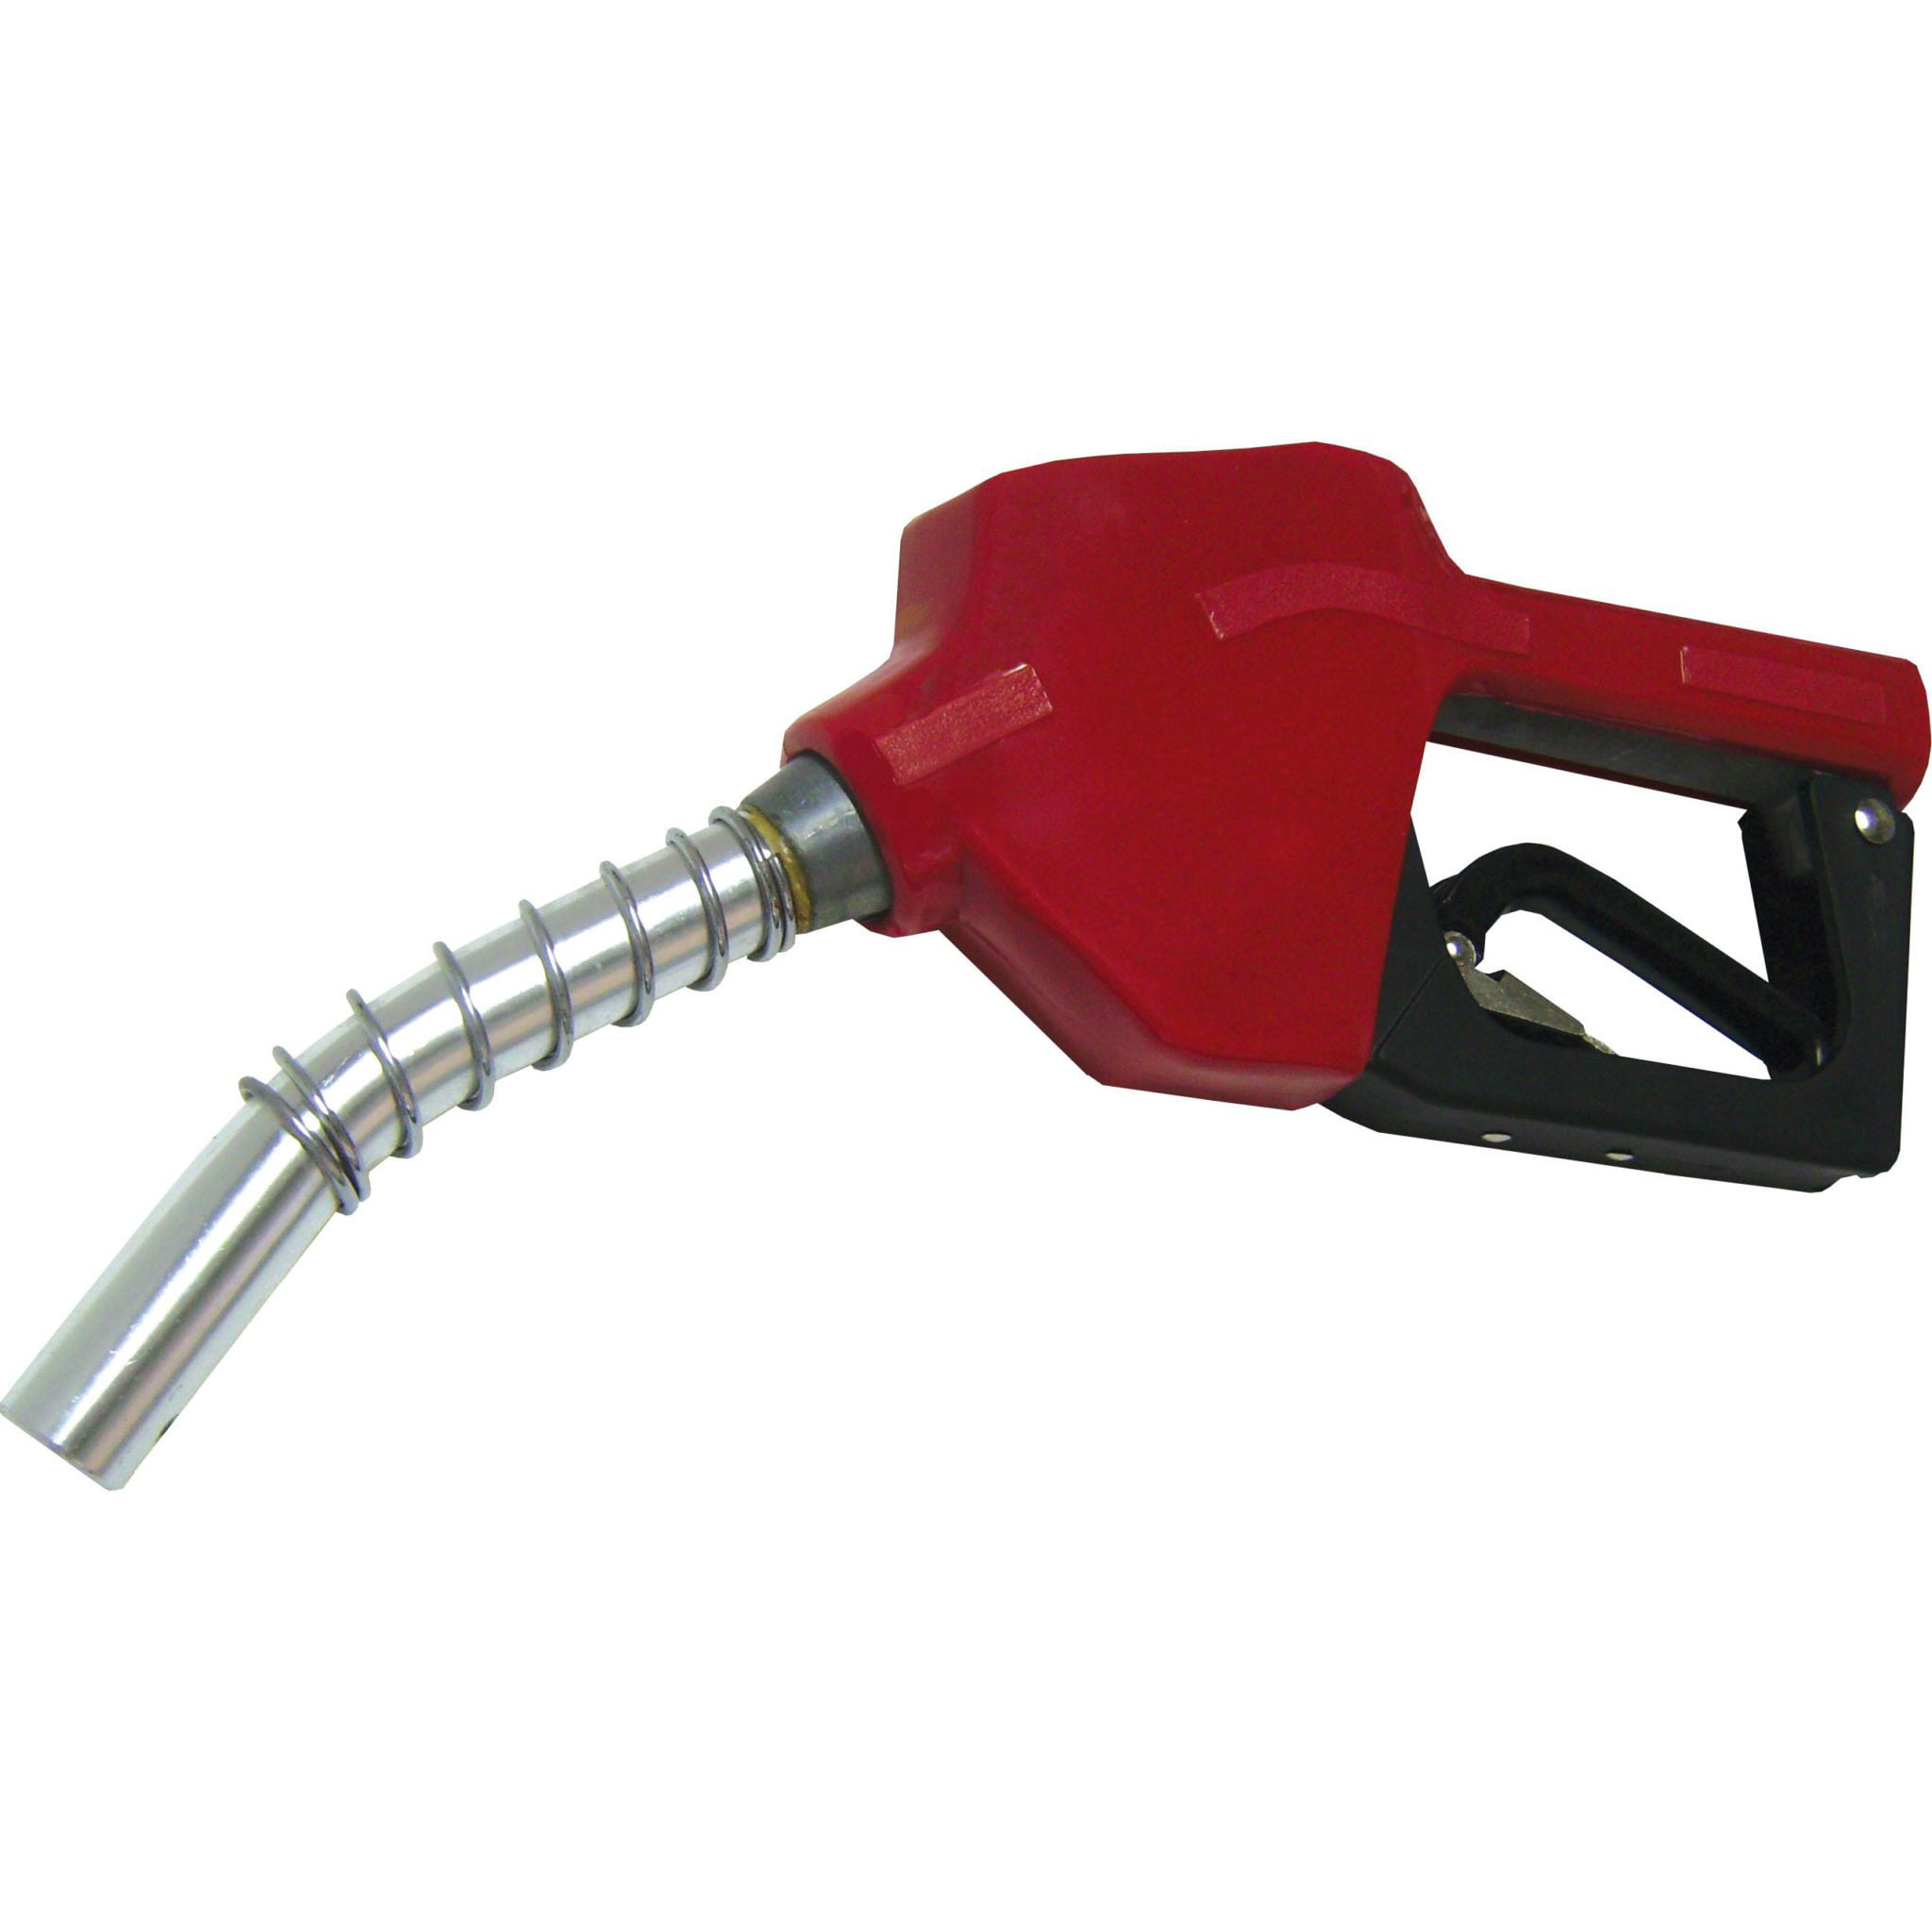 Delavan 00085-70a1 Furnace Nozzle .85 GPH 70 Degree SF Hollow Cone Red Vial for sale online 